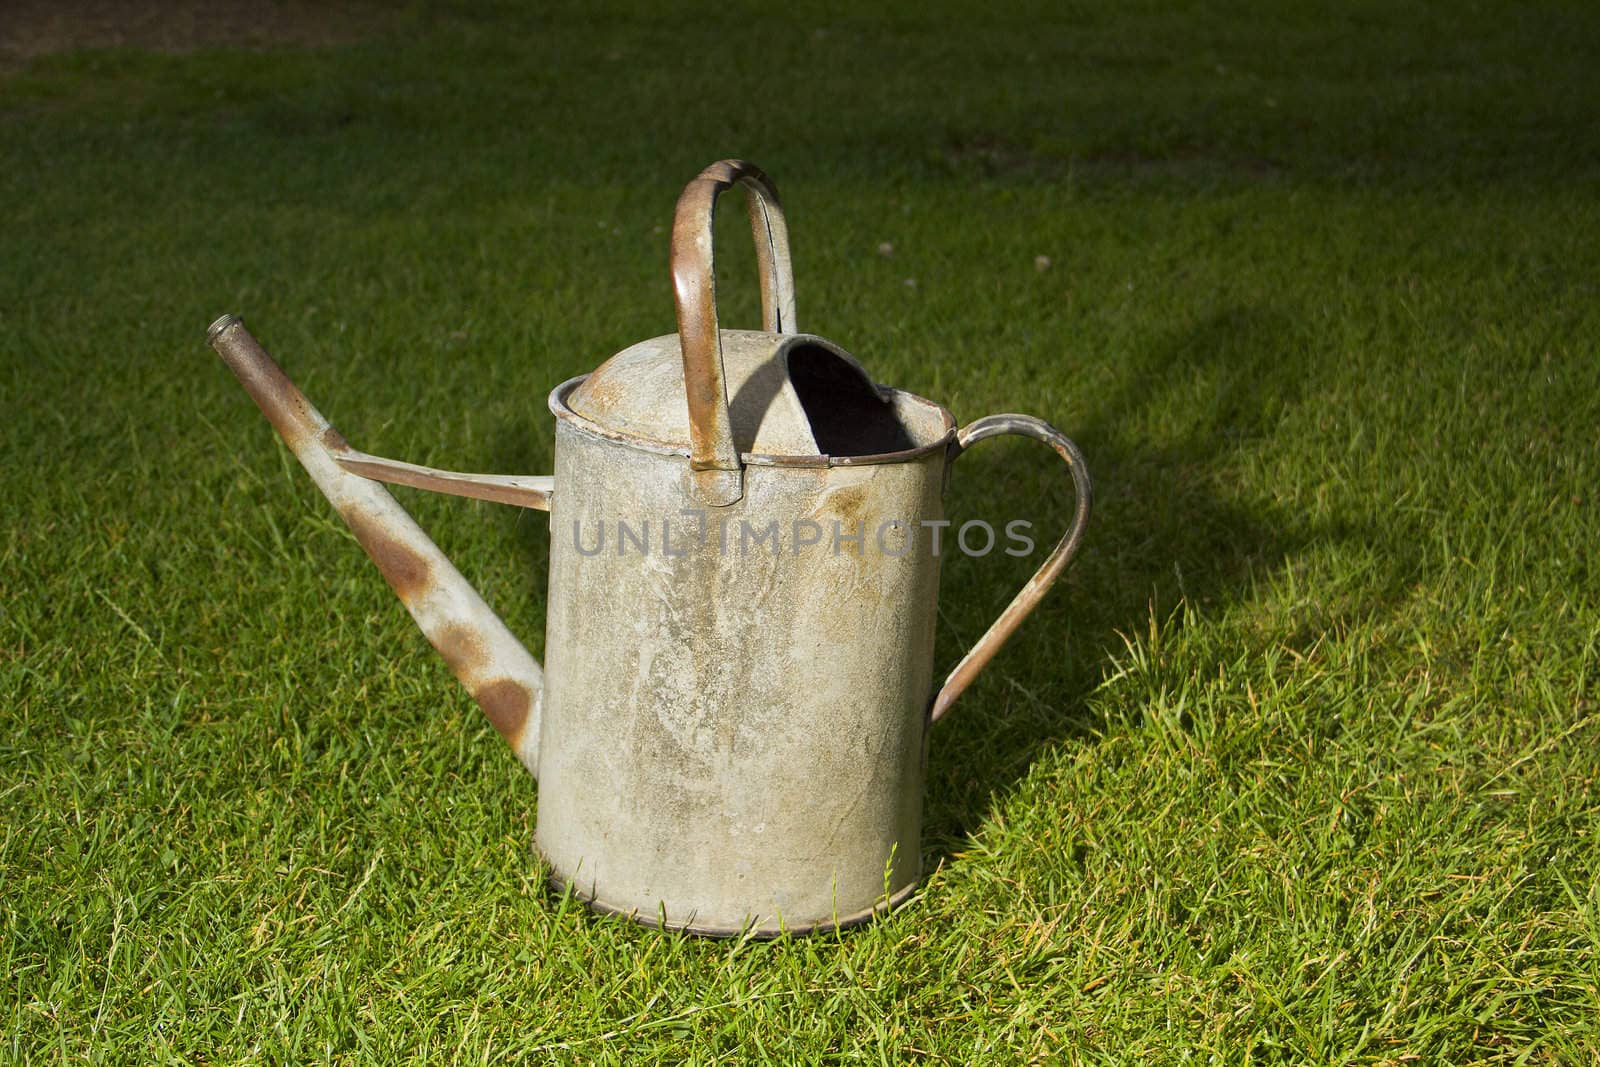 Left in the dark and spotlit this innocent watering can has a sinister look to it